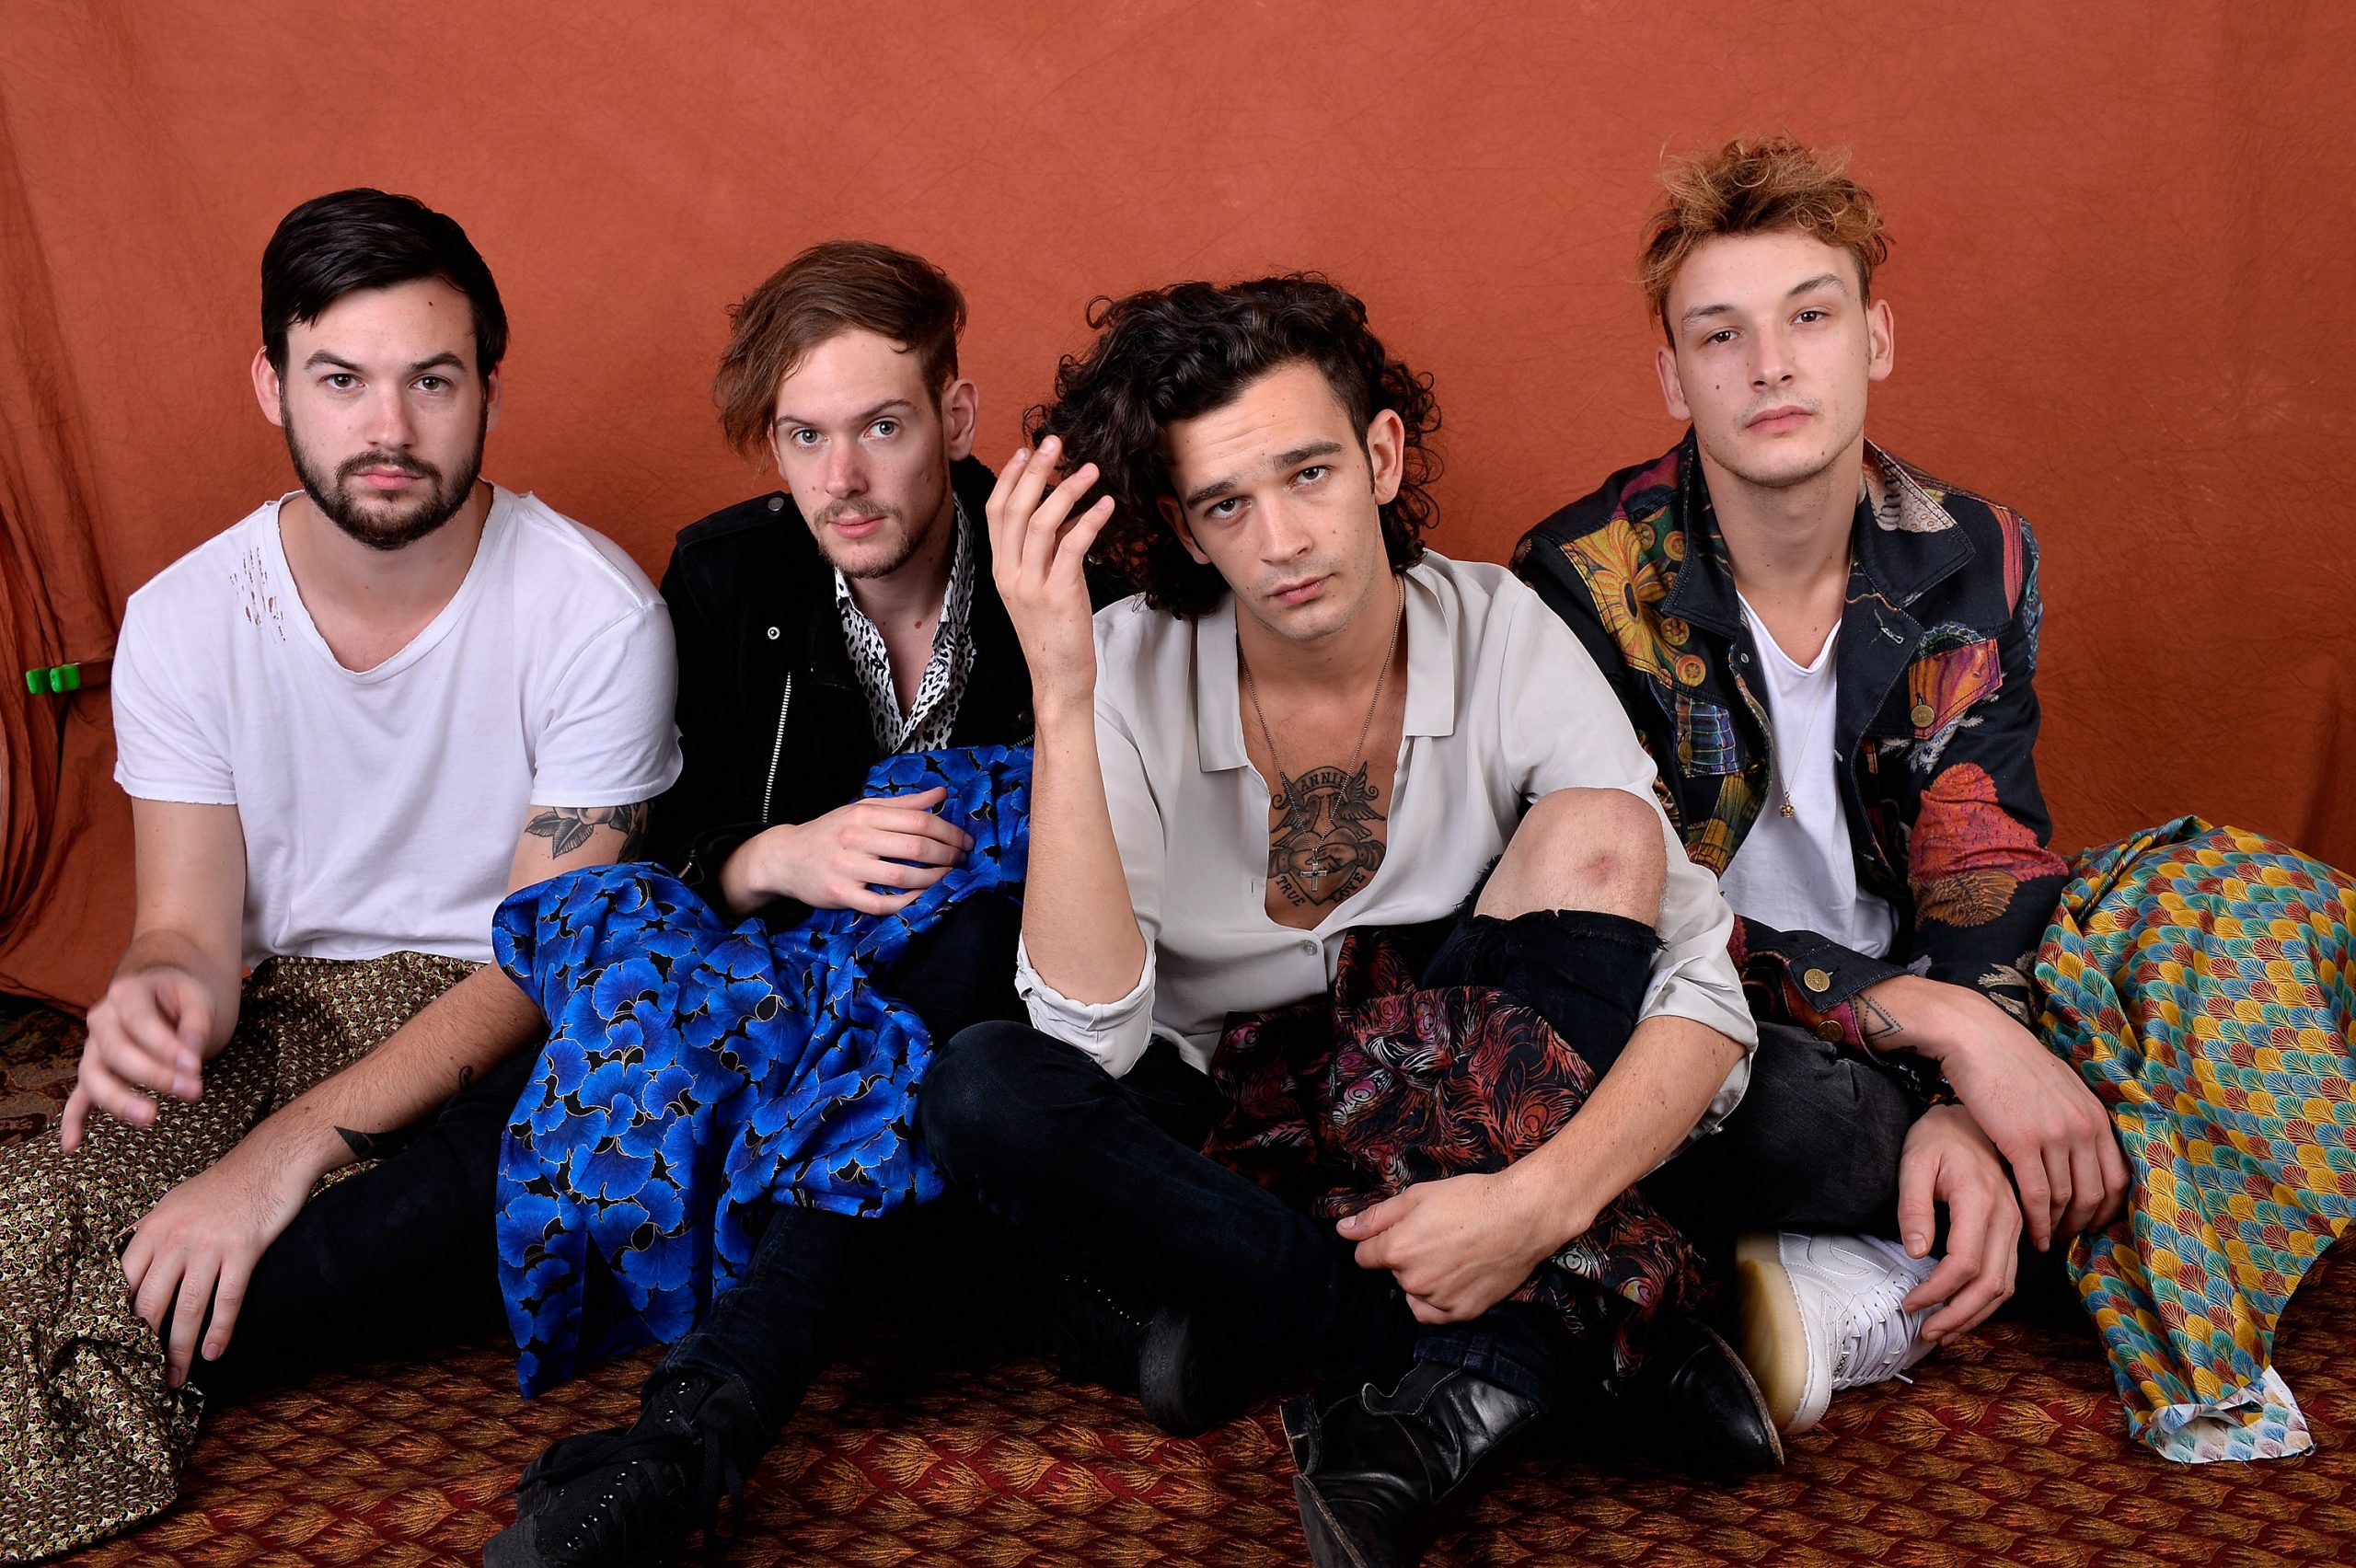 The 1975 band